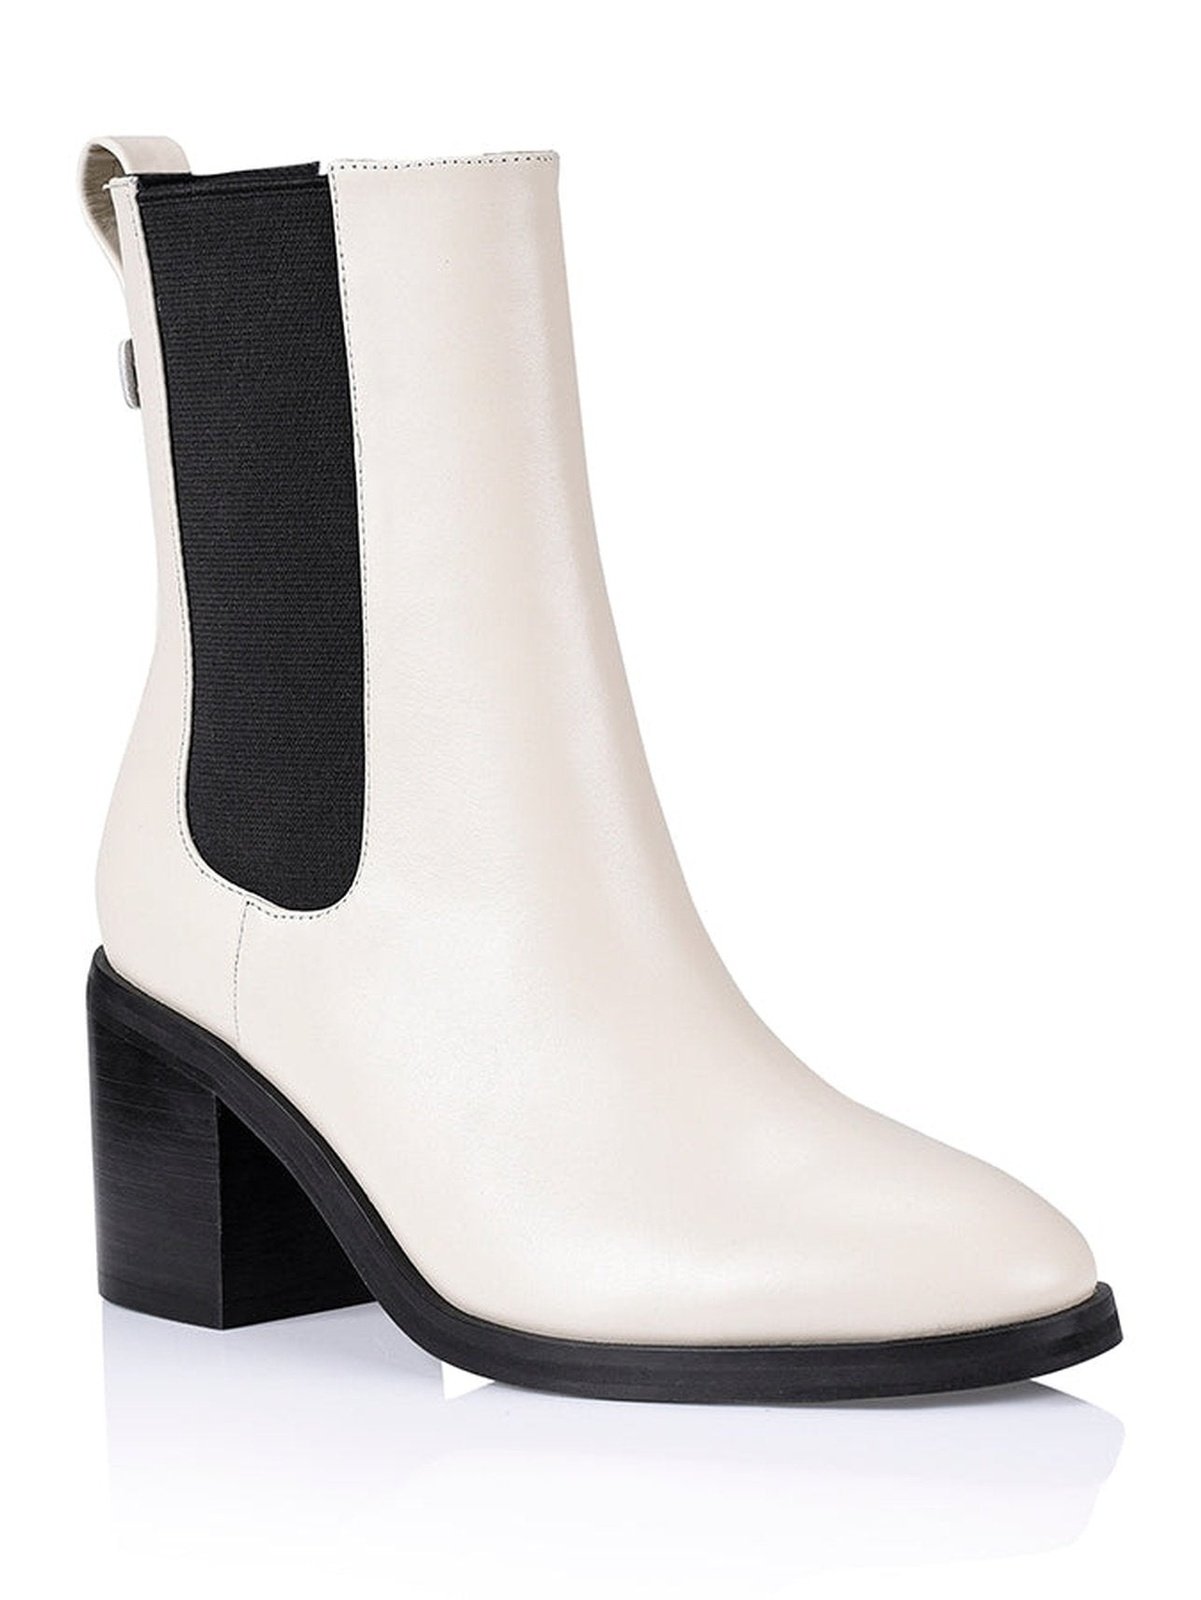 Watson Chelsea Gusset Boots - Cream Leather